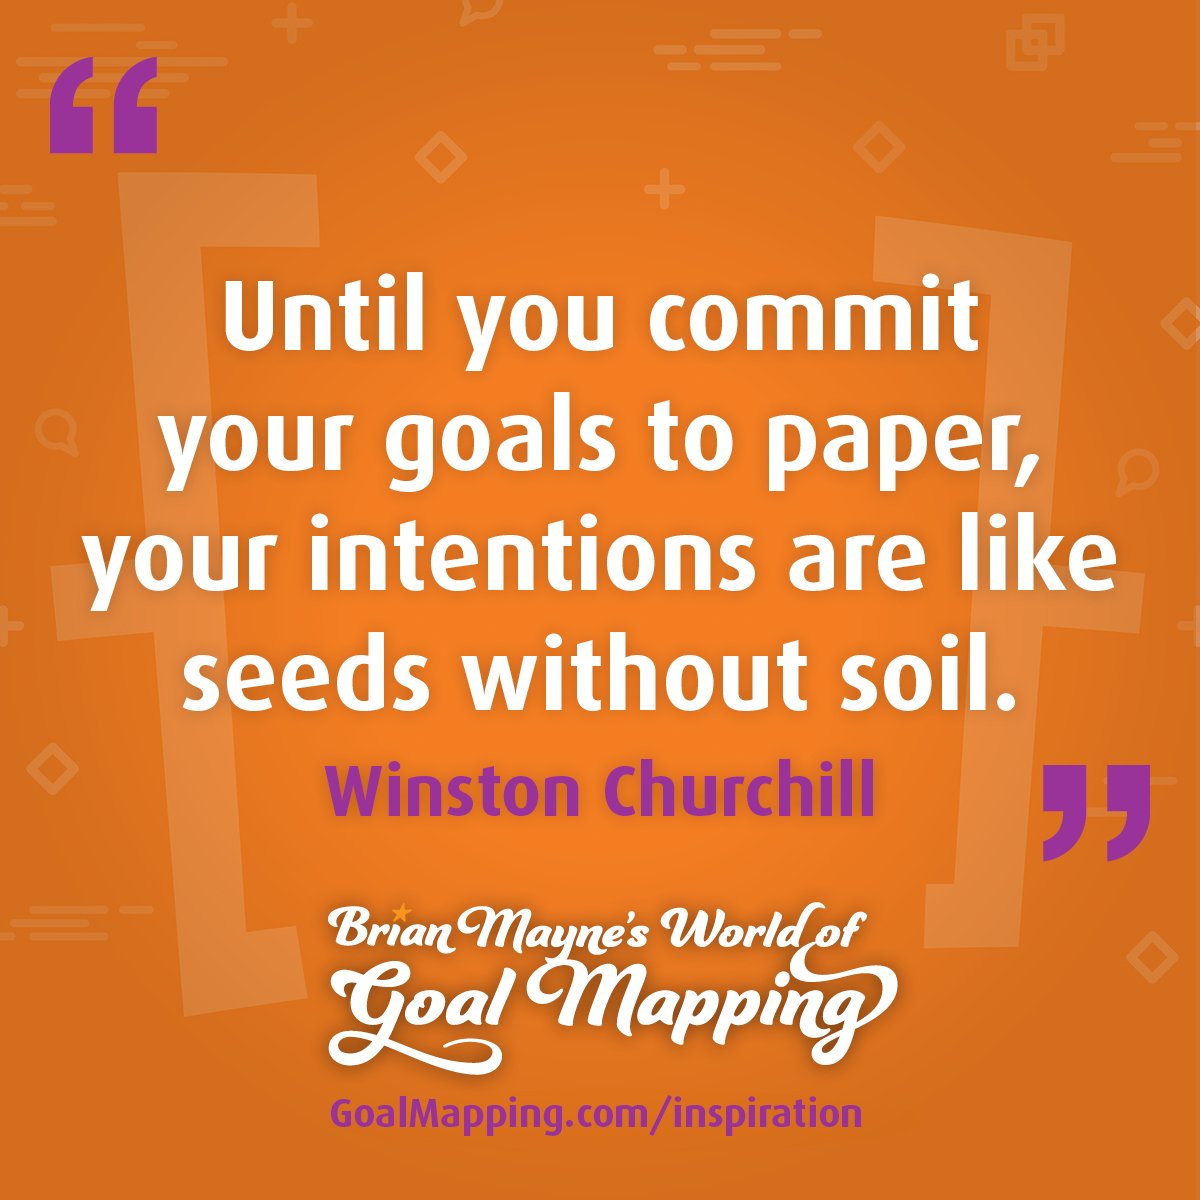 "Until you commit your goals to paper, your intentions are like seeds without soil." Winston Churchill